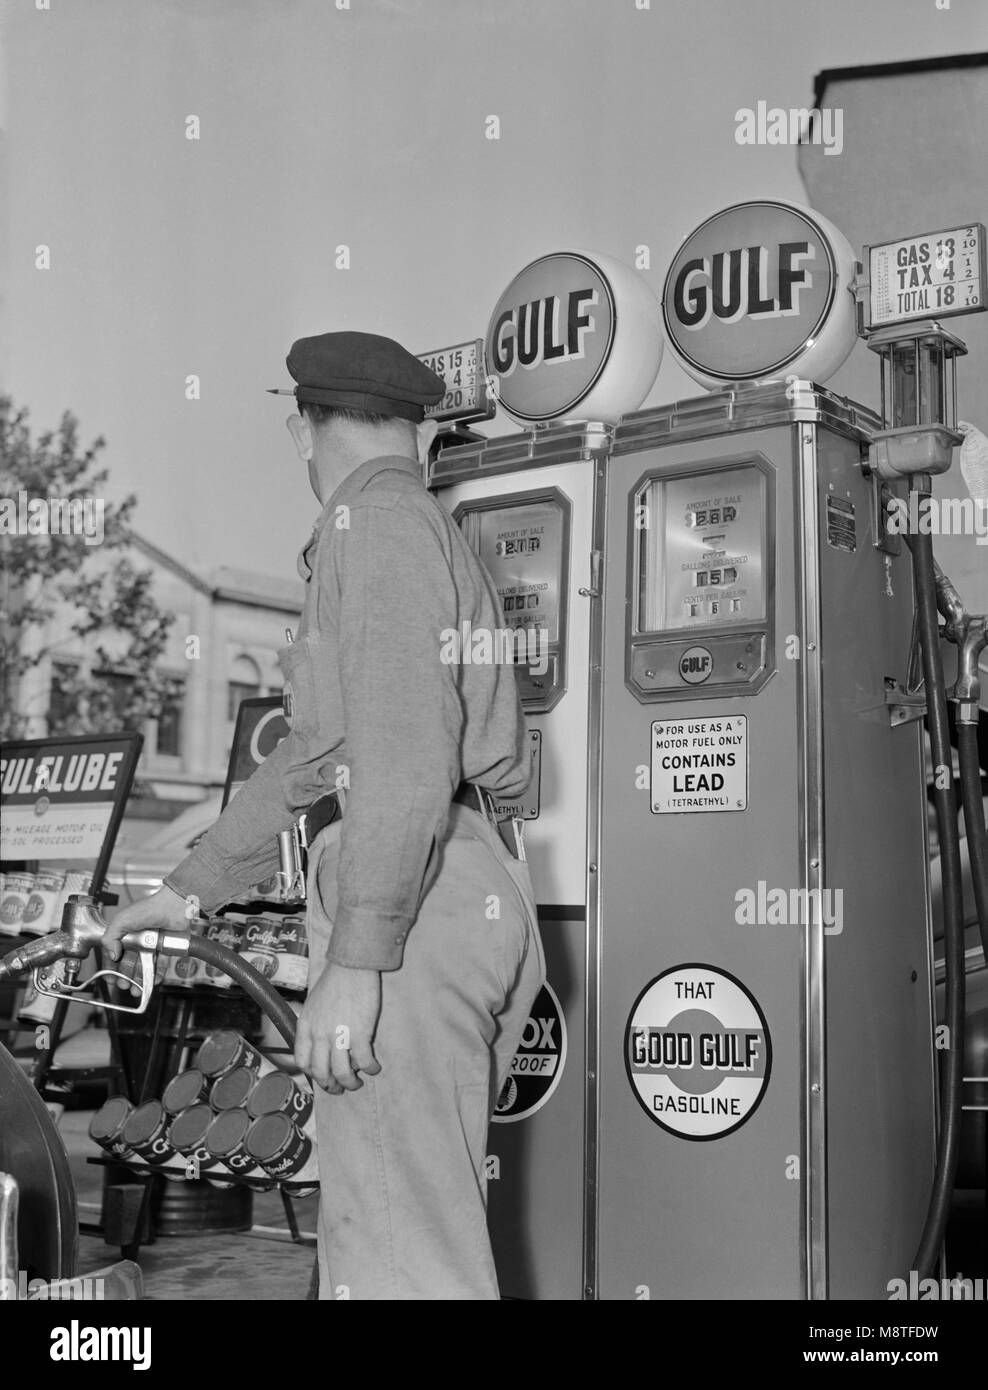 Gas Station Attendant Pumping Gas while Keeping an eye on Gauge during Gasoline Rationing, USA, Office of War Information, 1940's Stock Photo